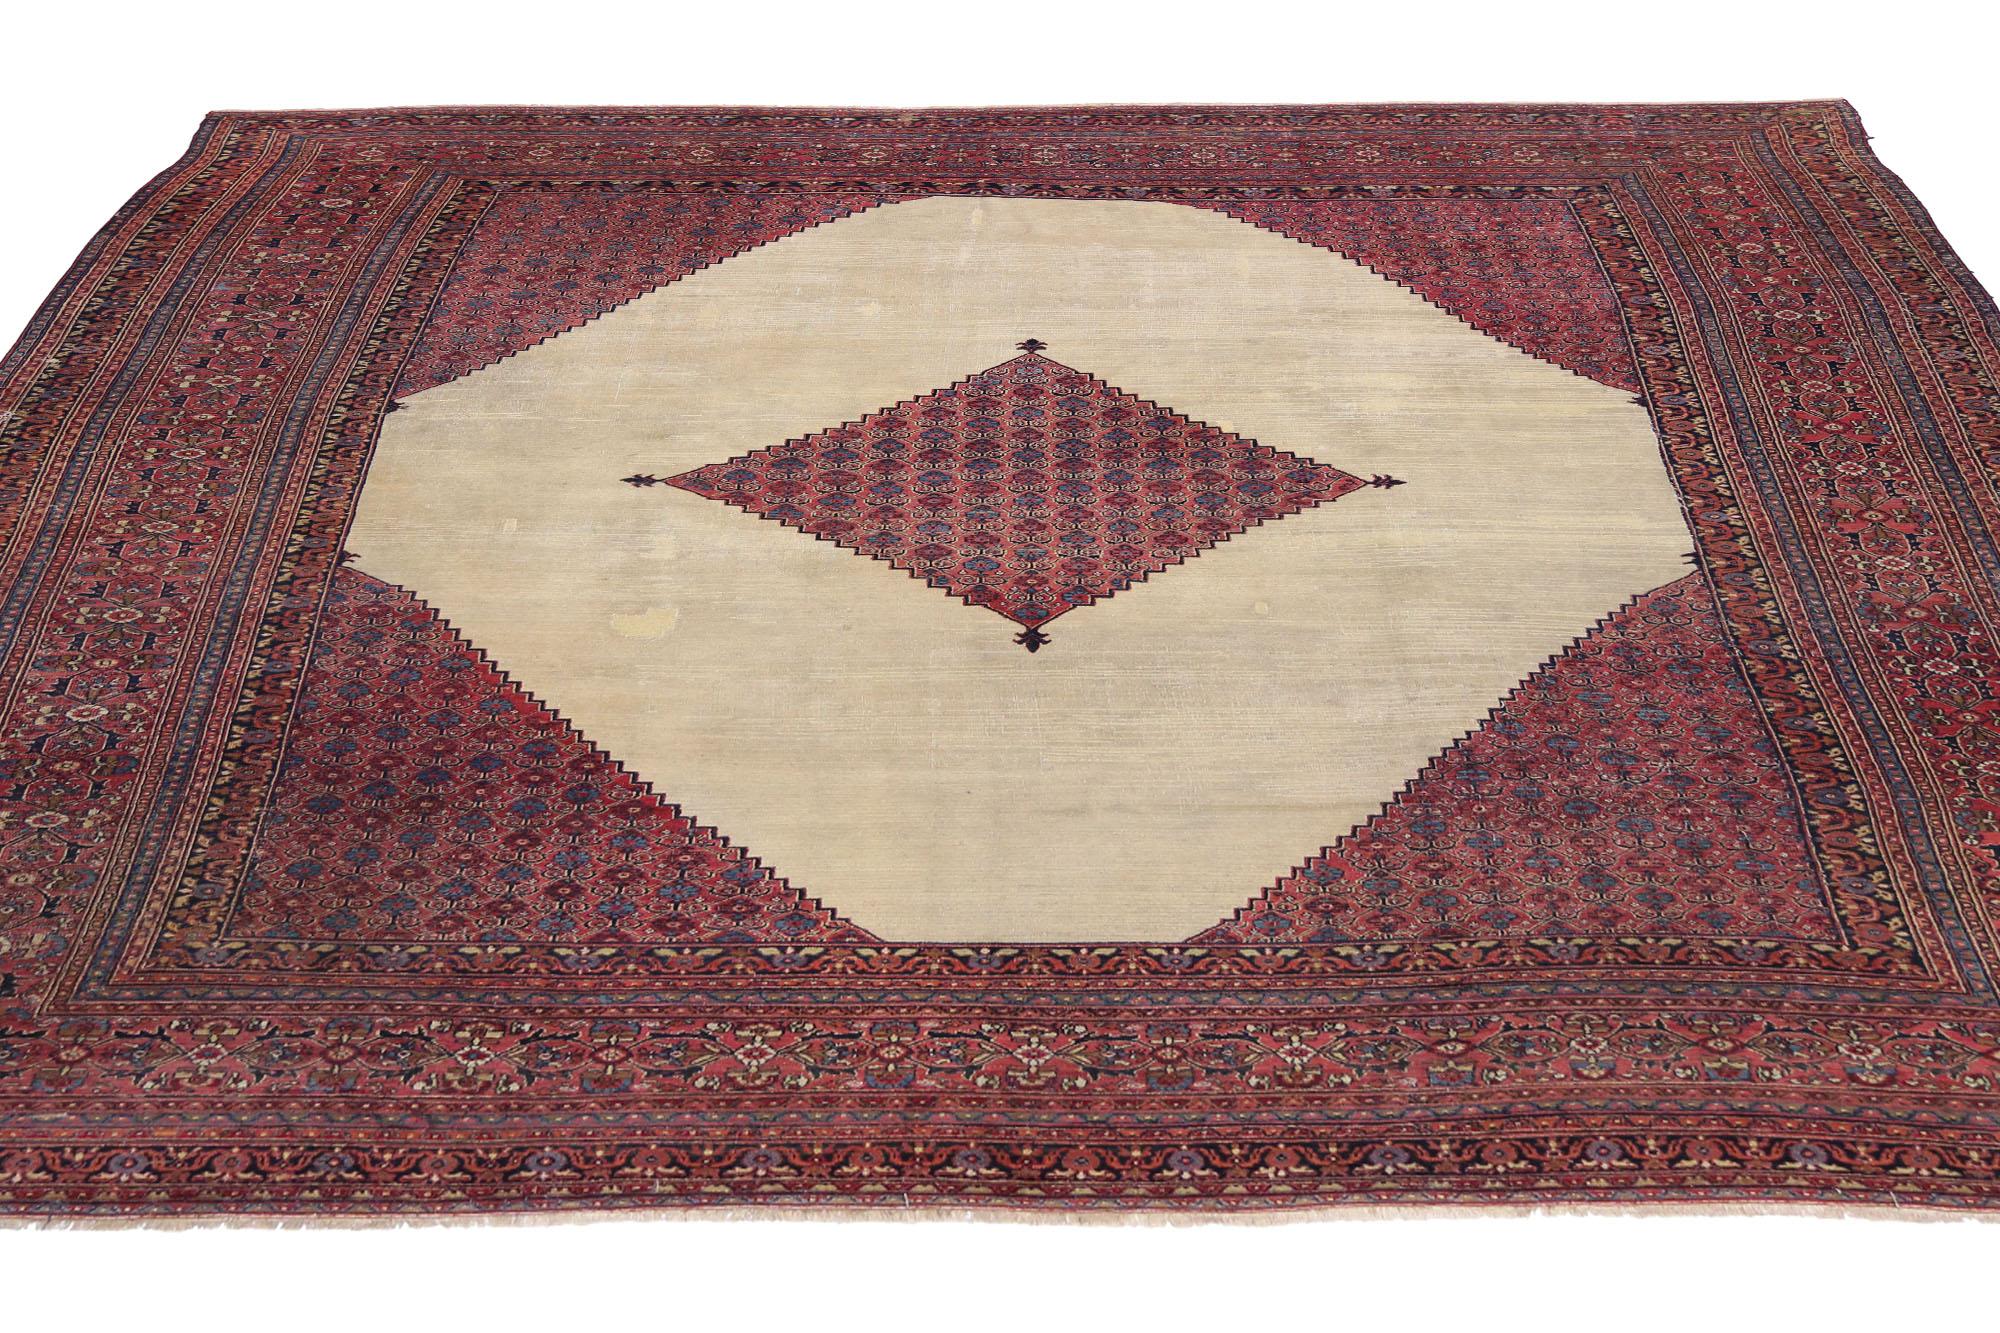 74232 Antique Persian Khorassan Rug Hotel Lobby Size Carpet 13'09 x 15'09.
Timeless design and effortless beauty with rustic sensibility, this hand knotted wool antique Persian Khorassan rug is poised to impress. The geometric botanical design and